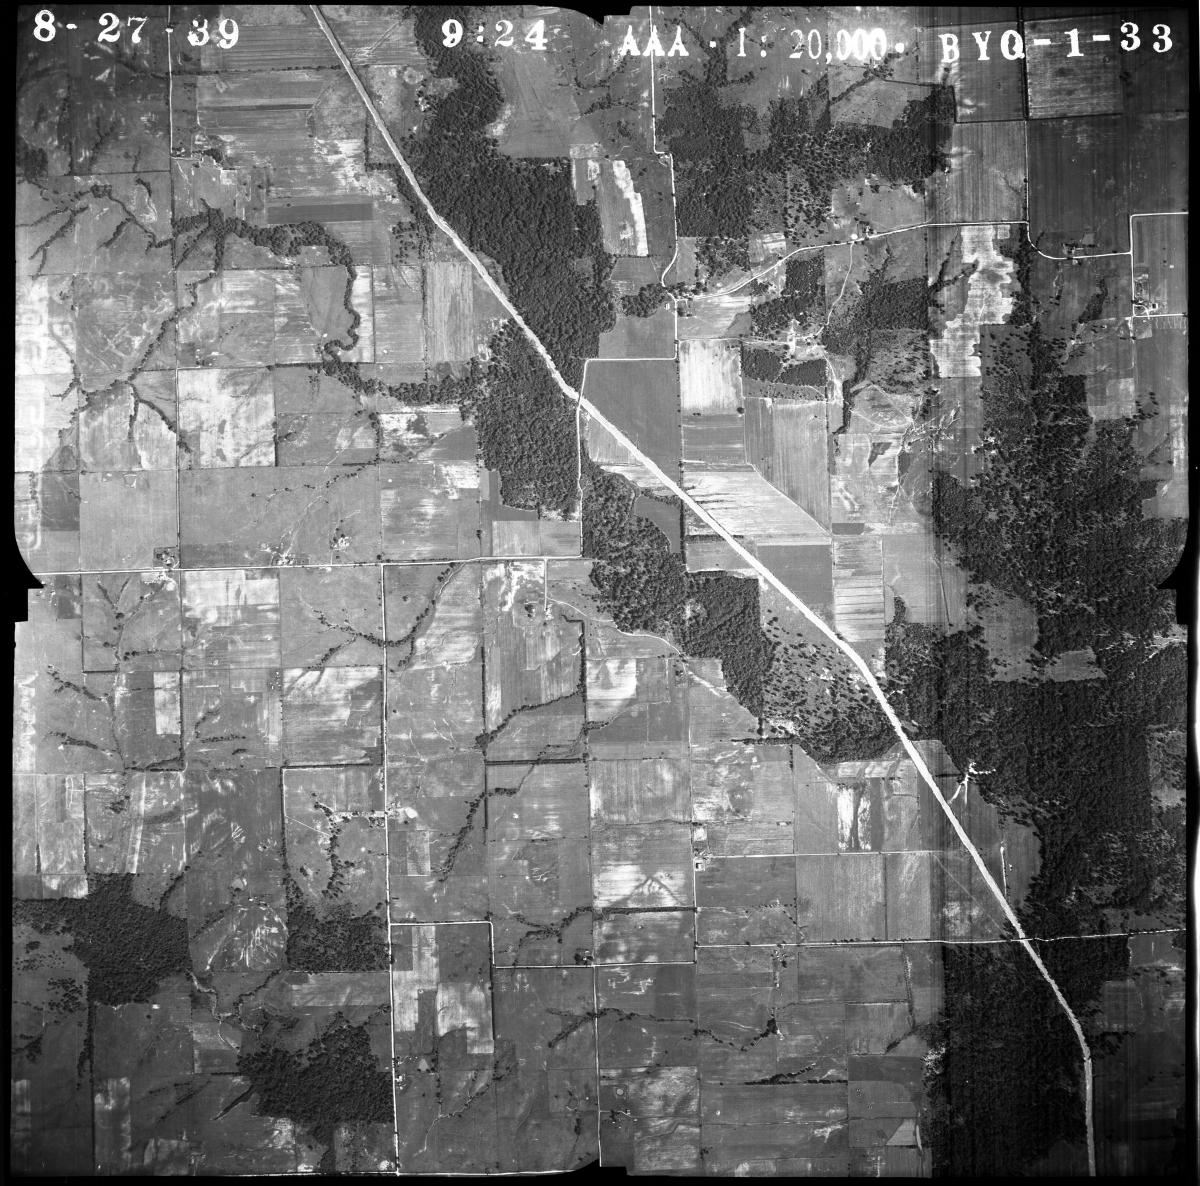 RG 145, Aerial Photography of the United States, DN1878, BYQ-1-33